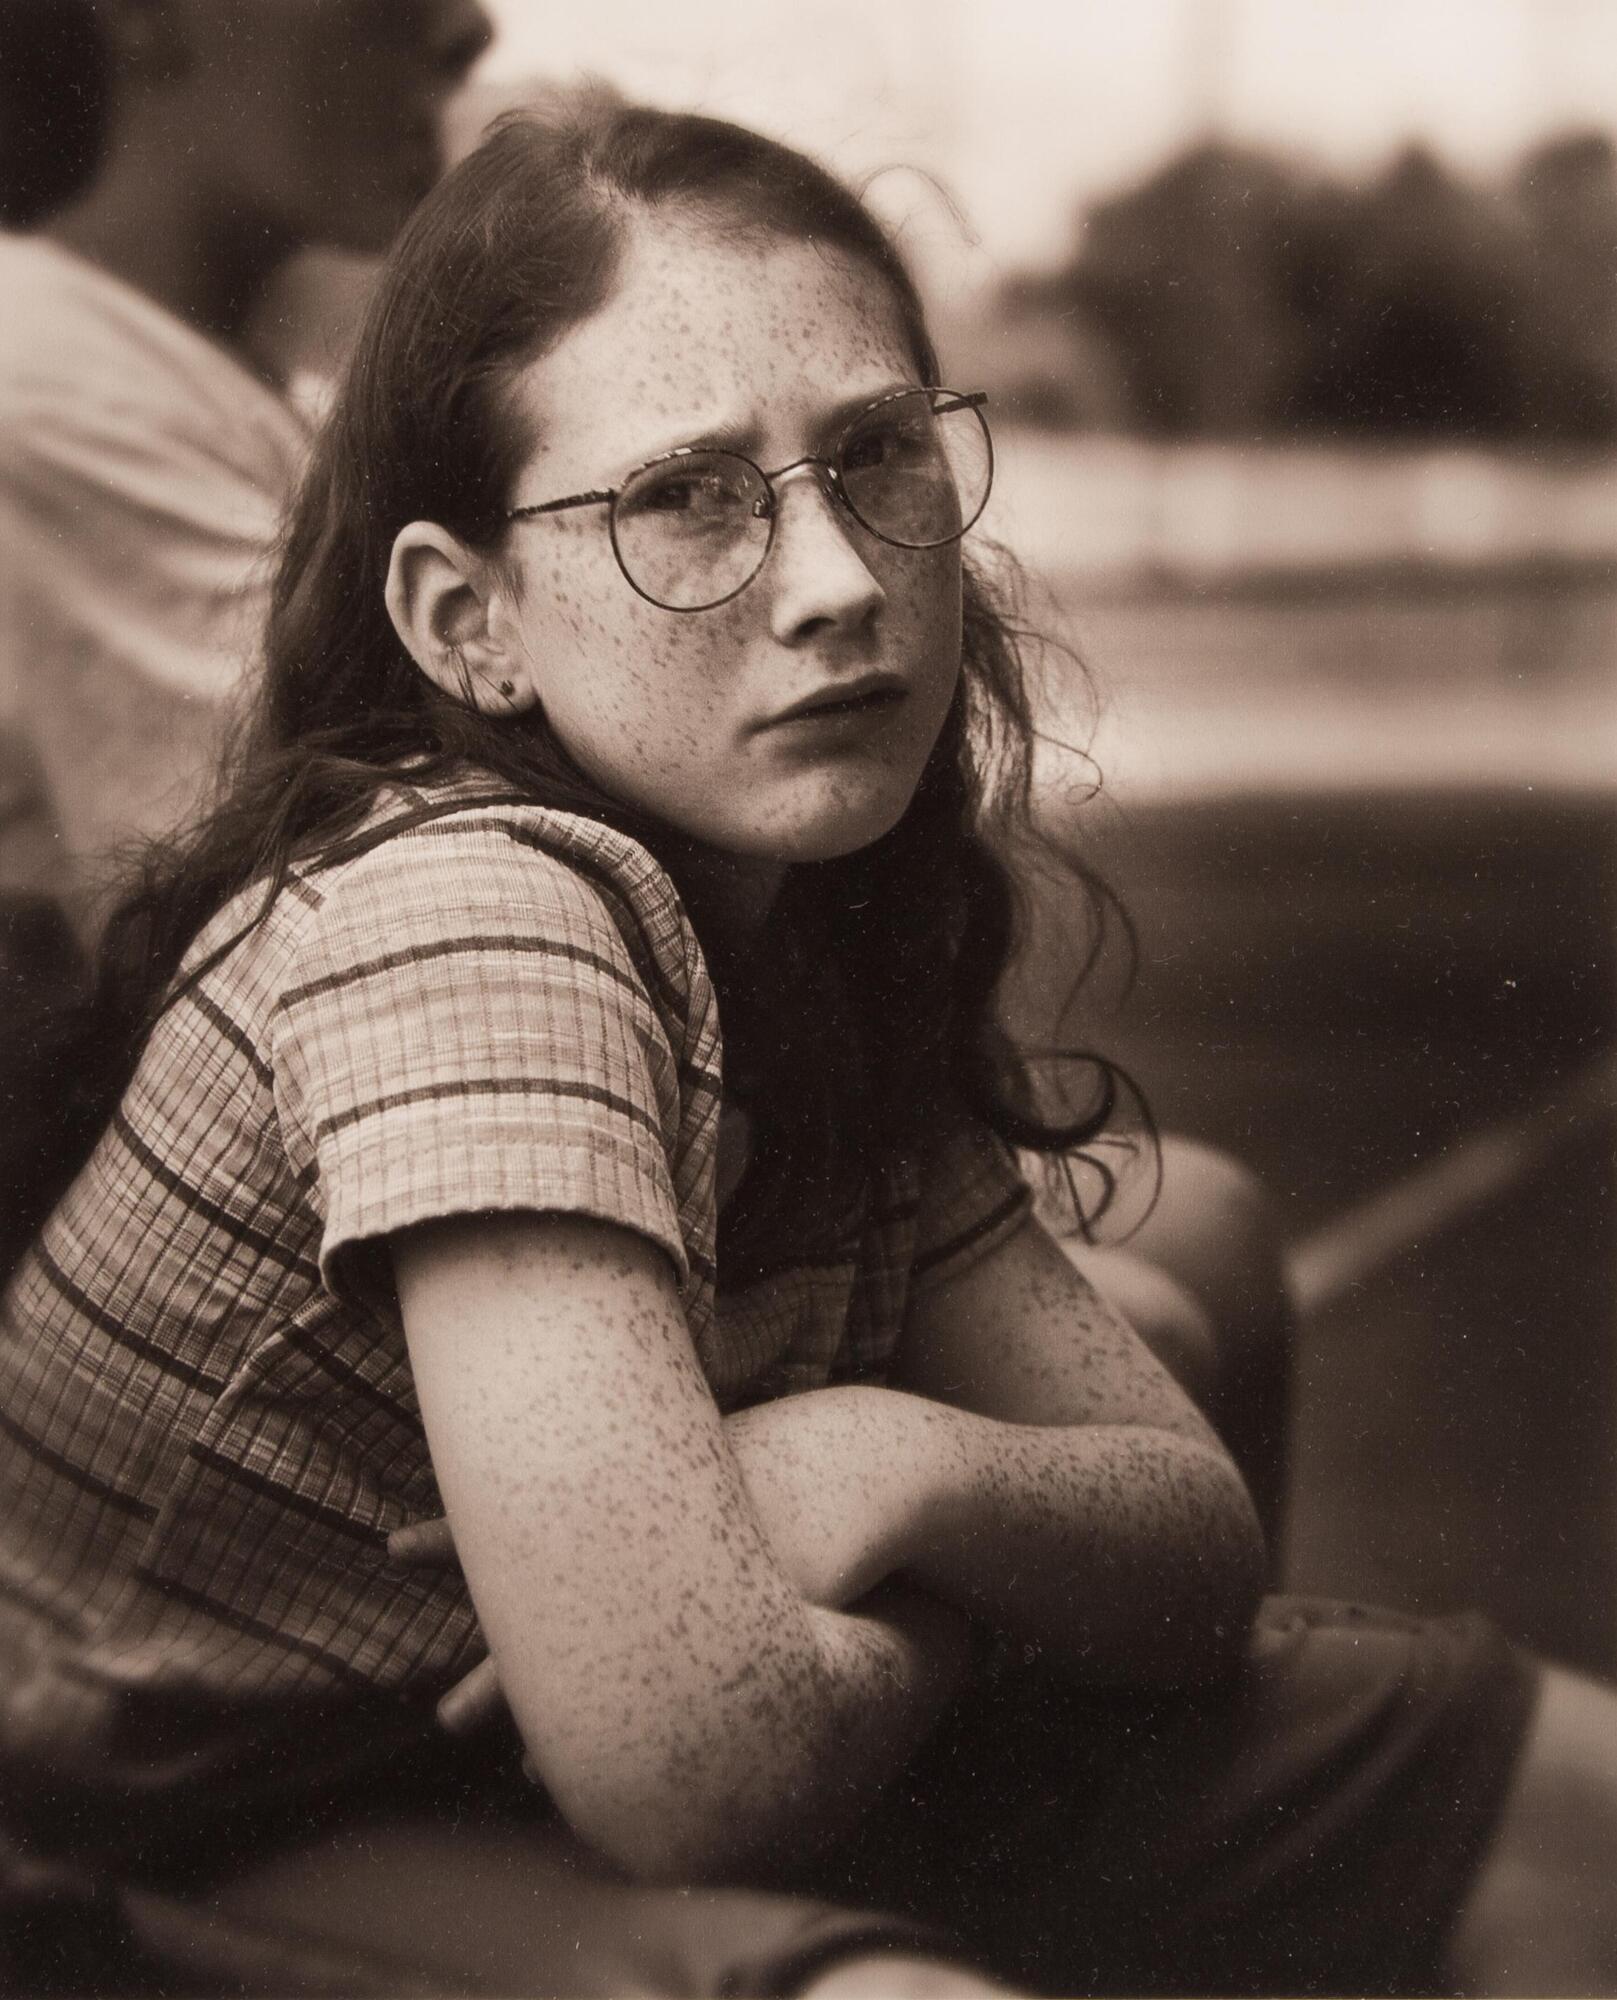 Girl with freckles, arms crossed, wearing glasses.